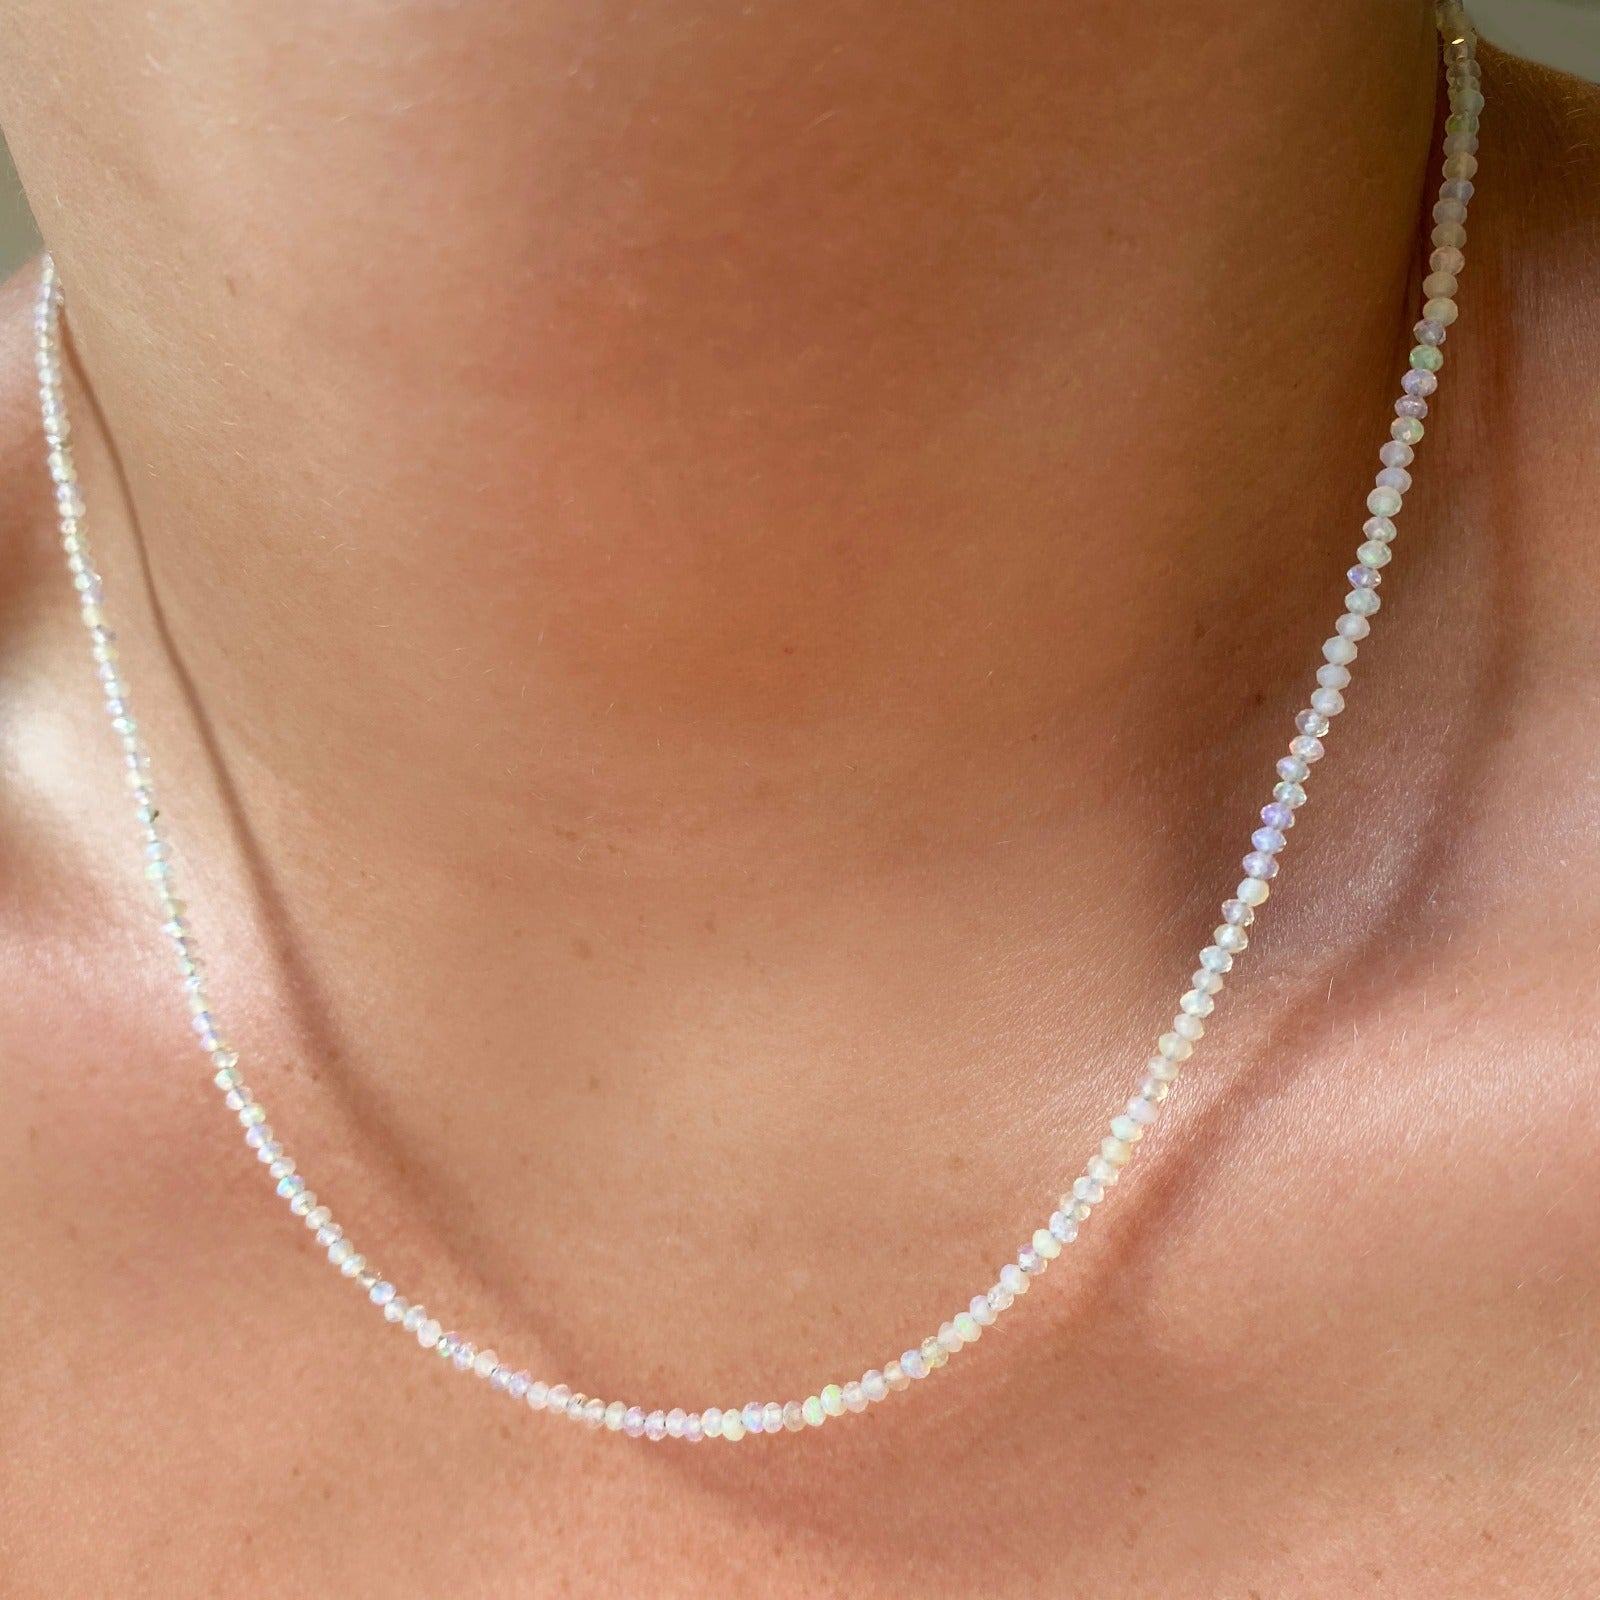 Shimmering beaded necklace made of 2.5mm faceted opals in shades of milky white on a gold linking lobster clasp. 